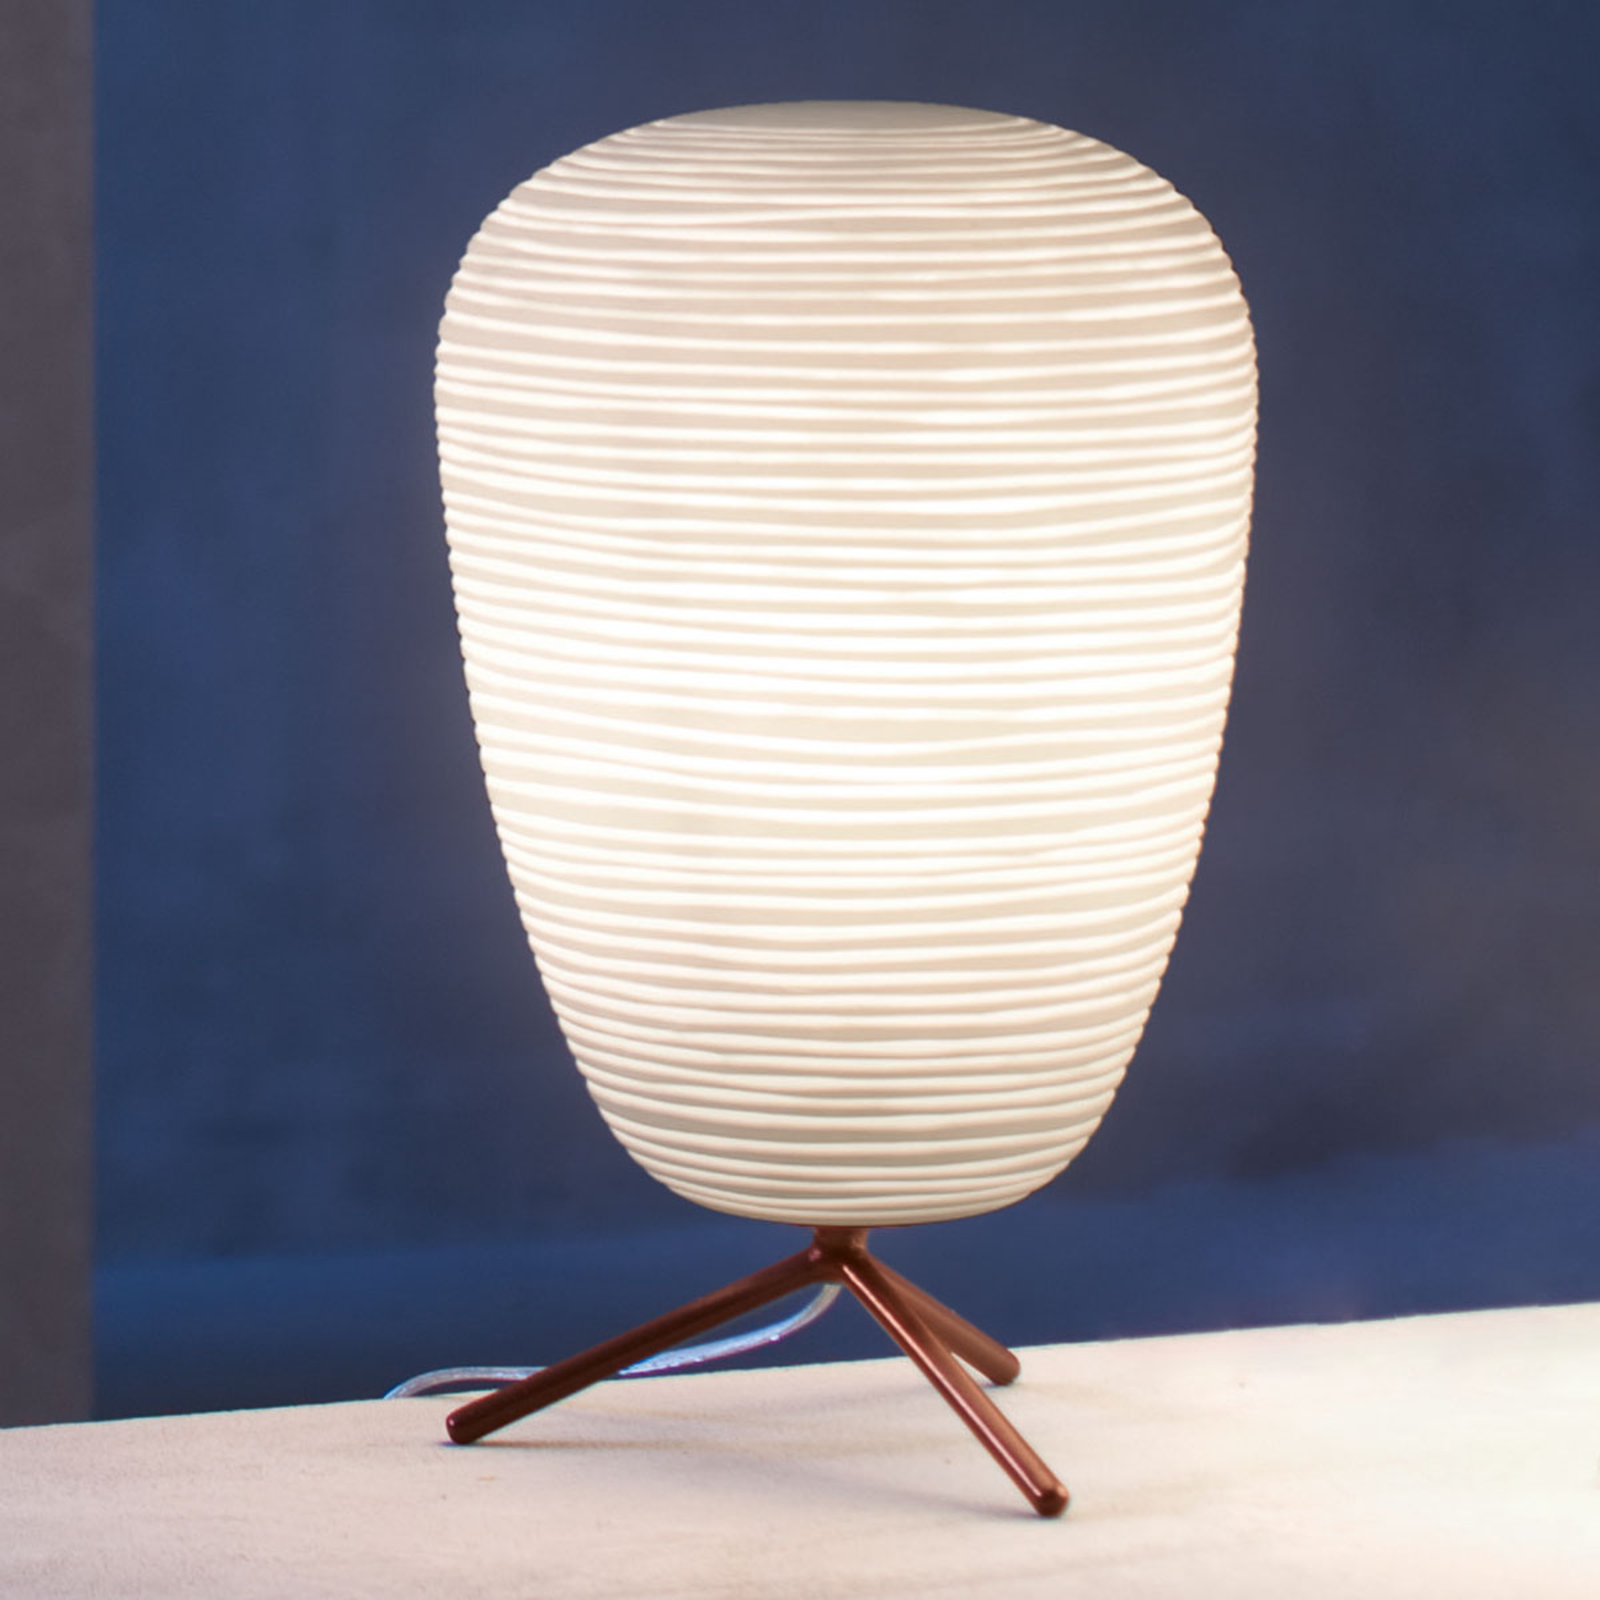 Foscarini Rituals 1 glass table lamp with dimmer